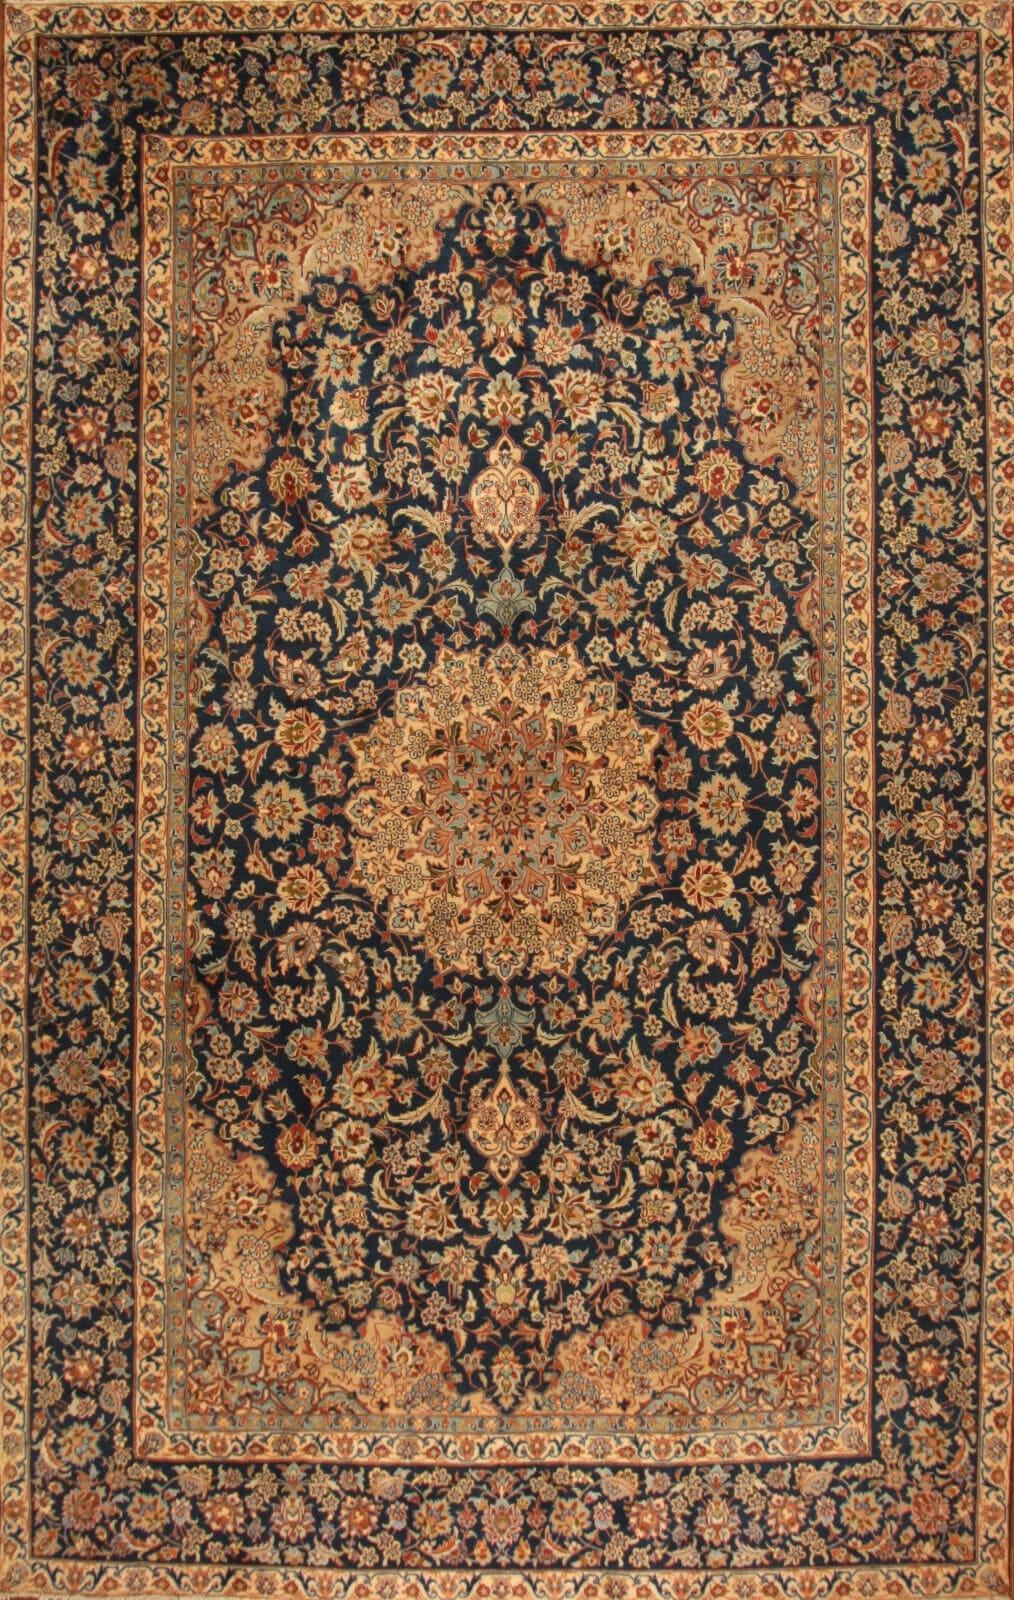 Late 20th Century Handmade Vintage Persian Style Isfahan Rug 9.5' x 15', 1970s - 1T29 For Sale